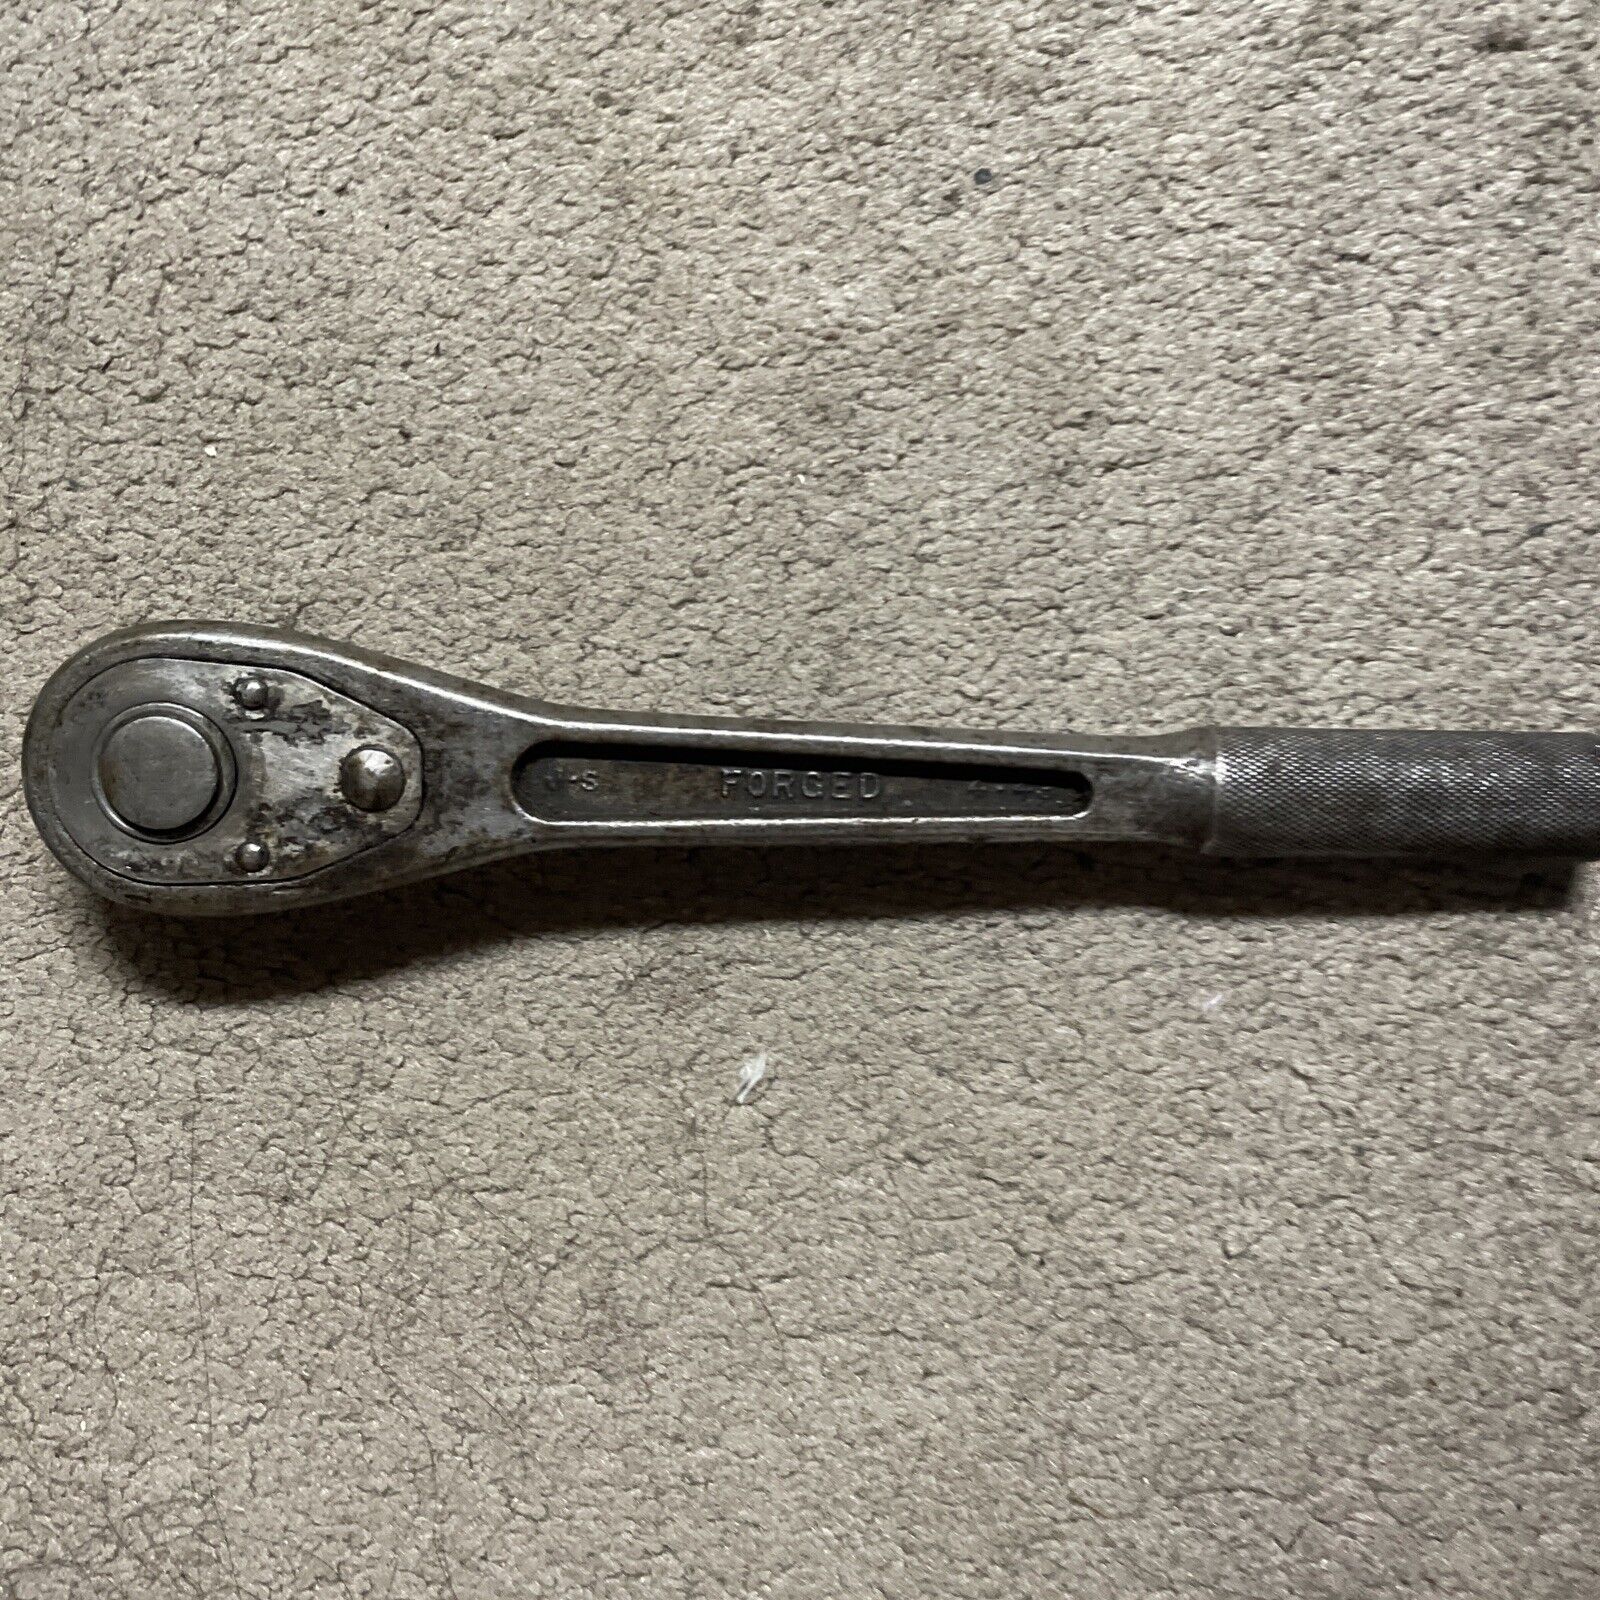 VINTAGE CRAFTSMAN TOOLS BE SERIES RATCHET  FORGED USA